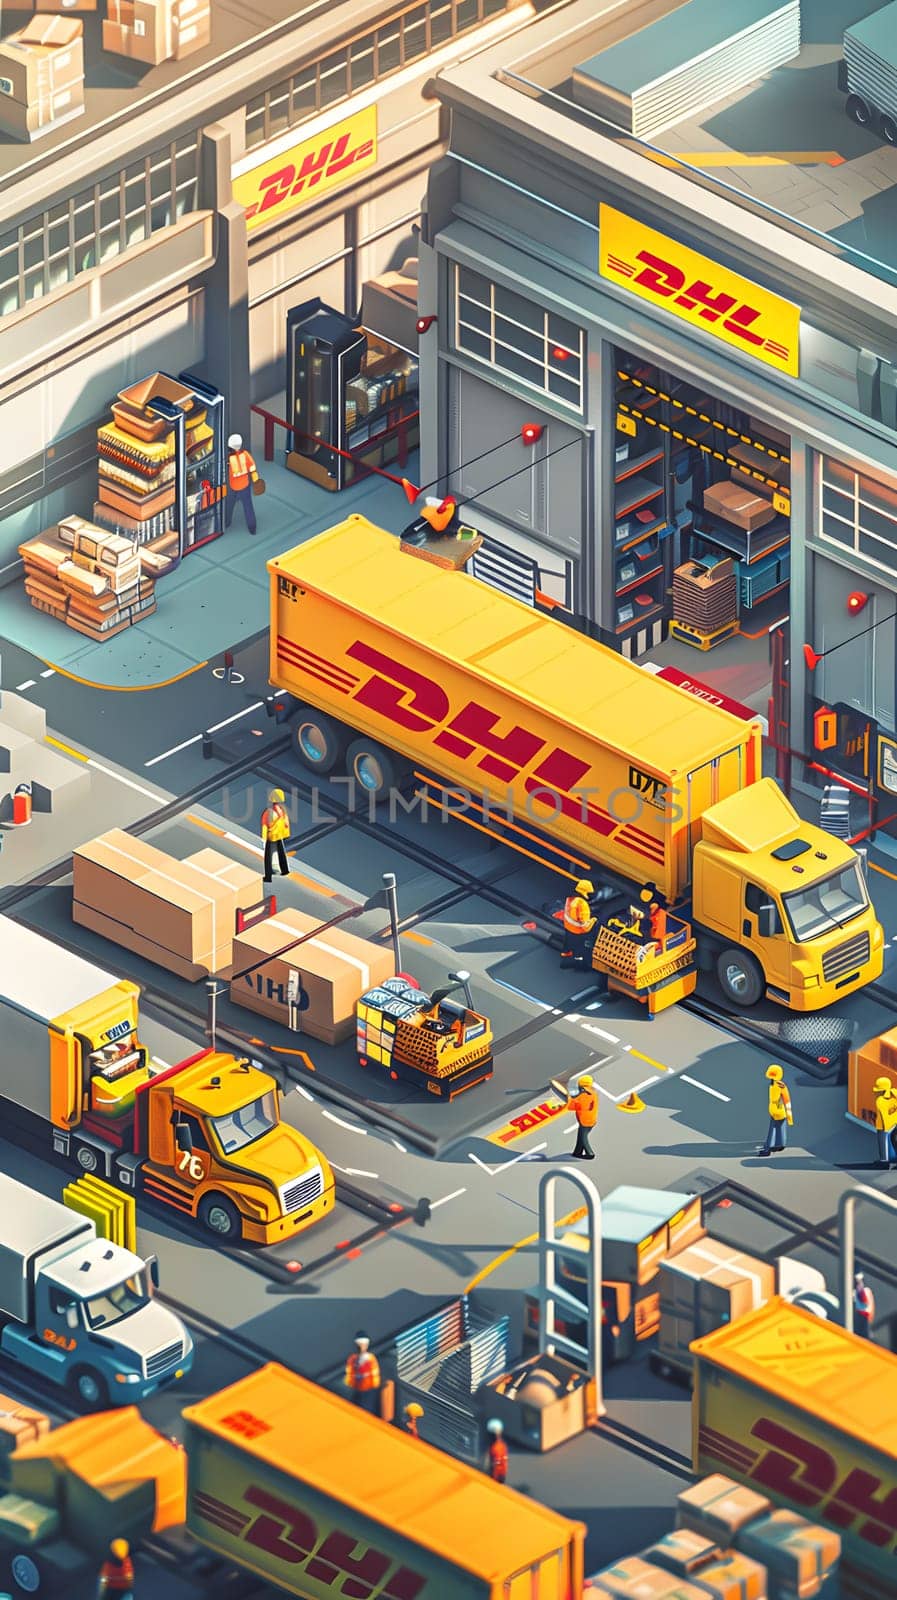 A toy truck, made out of Lego construction set pieces, is stationed in front of a warehouse, resembling a DHL motor vehicle